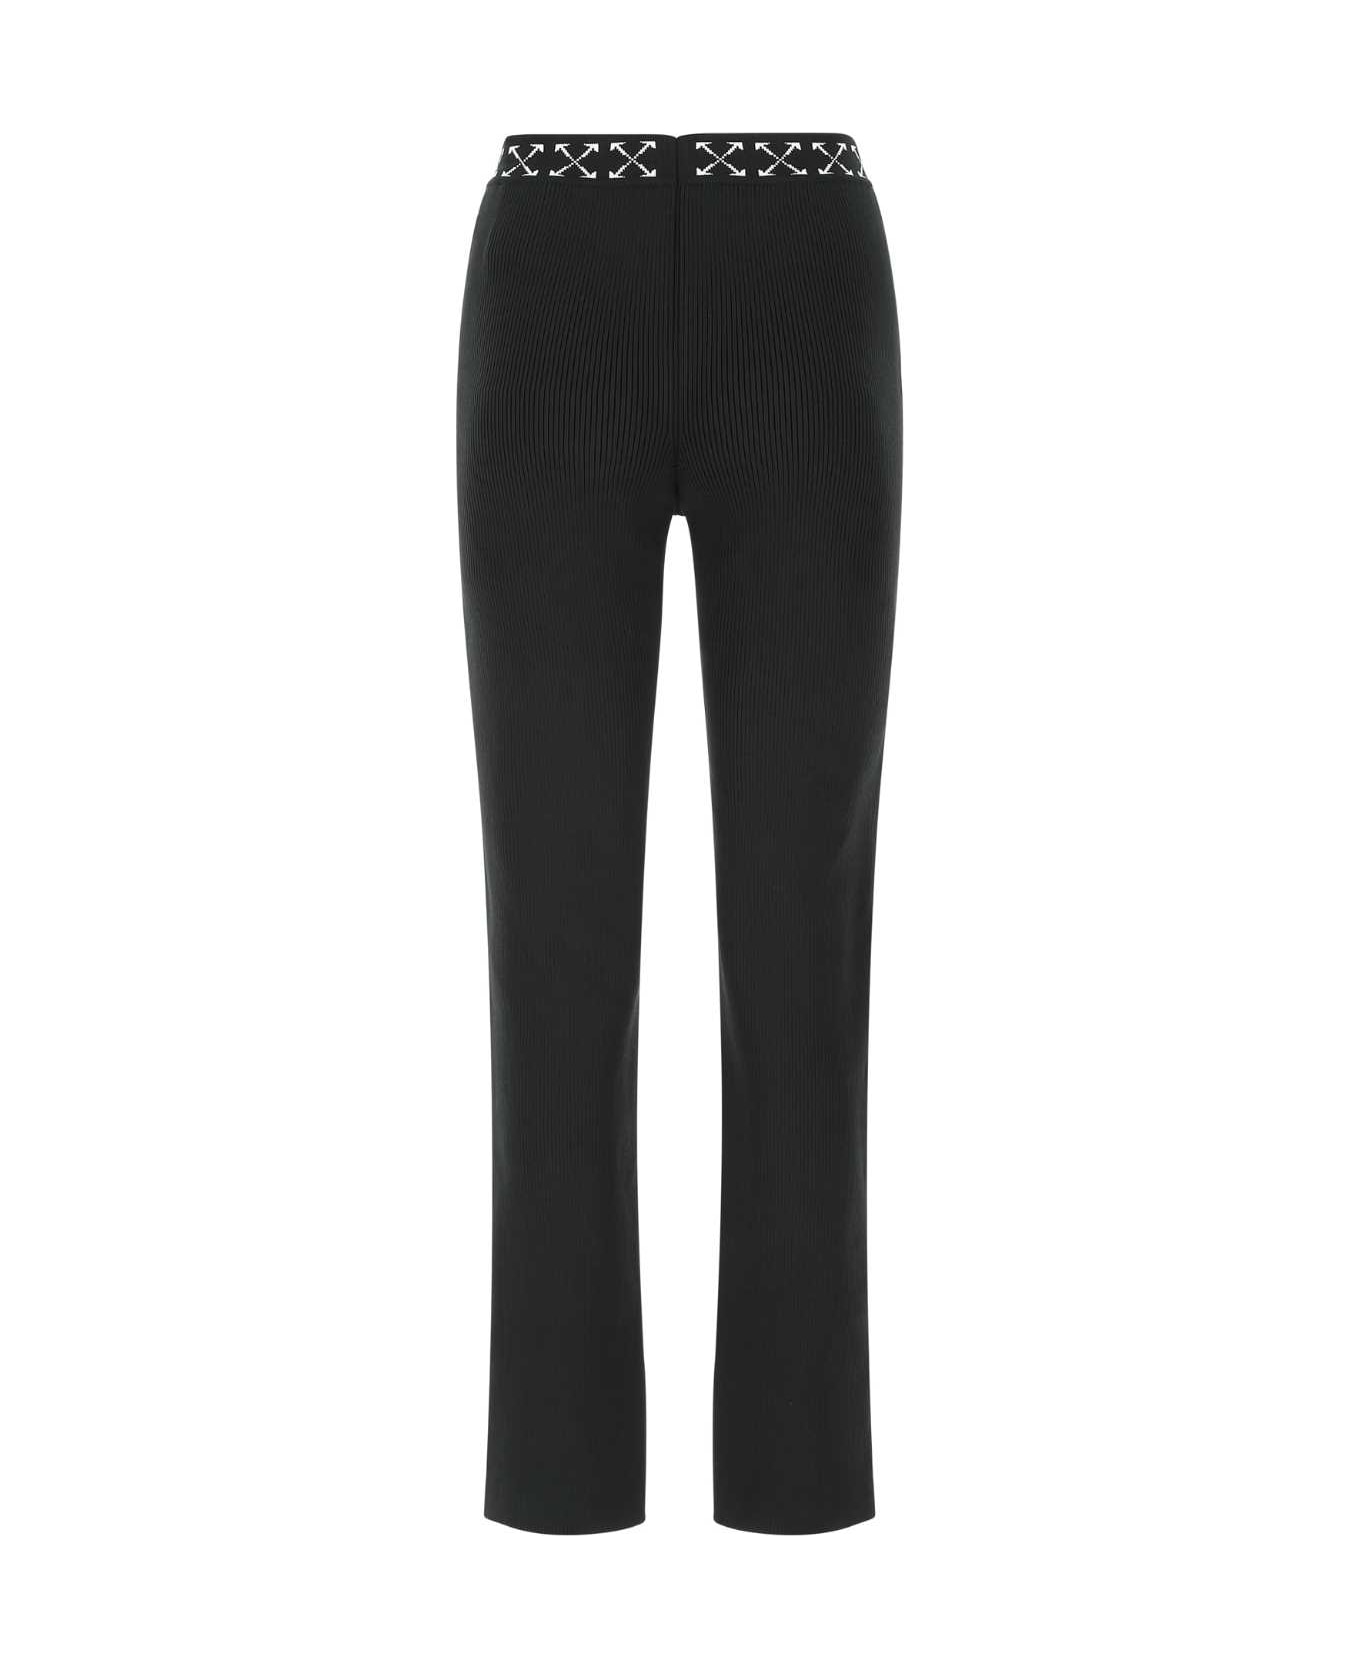 Off-White Black Stretch Polyester Blend Pant - 1001 ボトムス